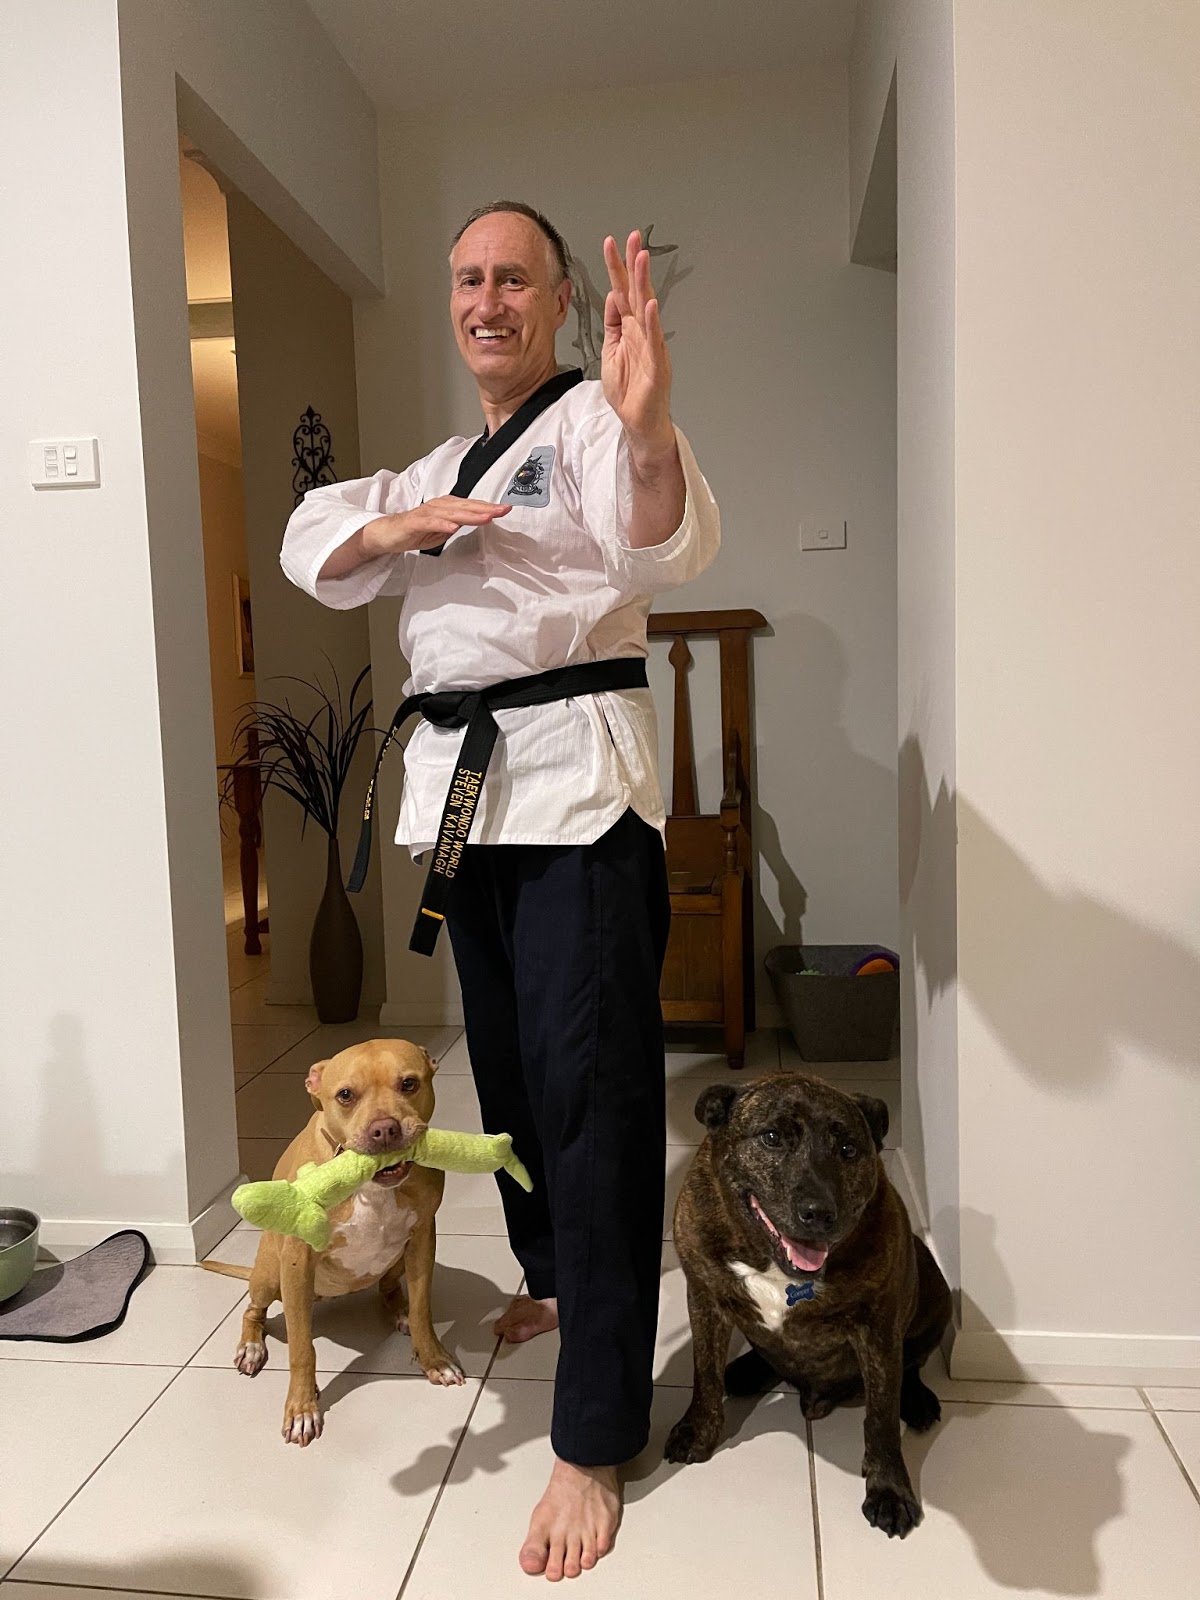 Steve Kavanagh posing with his two dogs in his taekwondo uniform